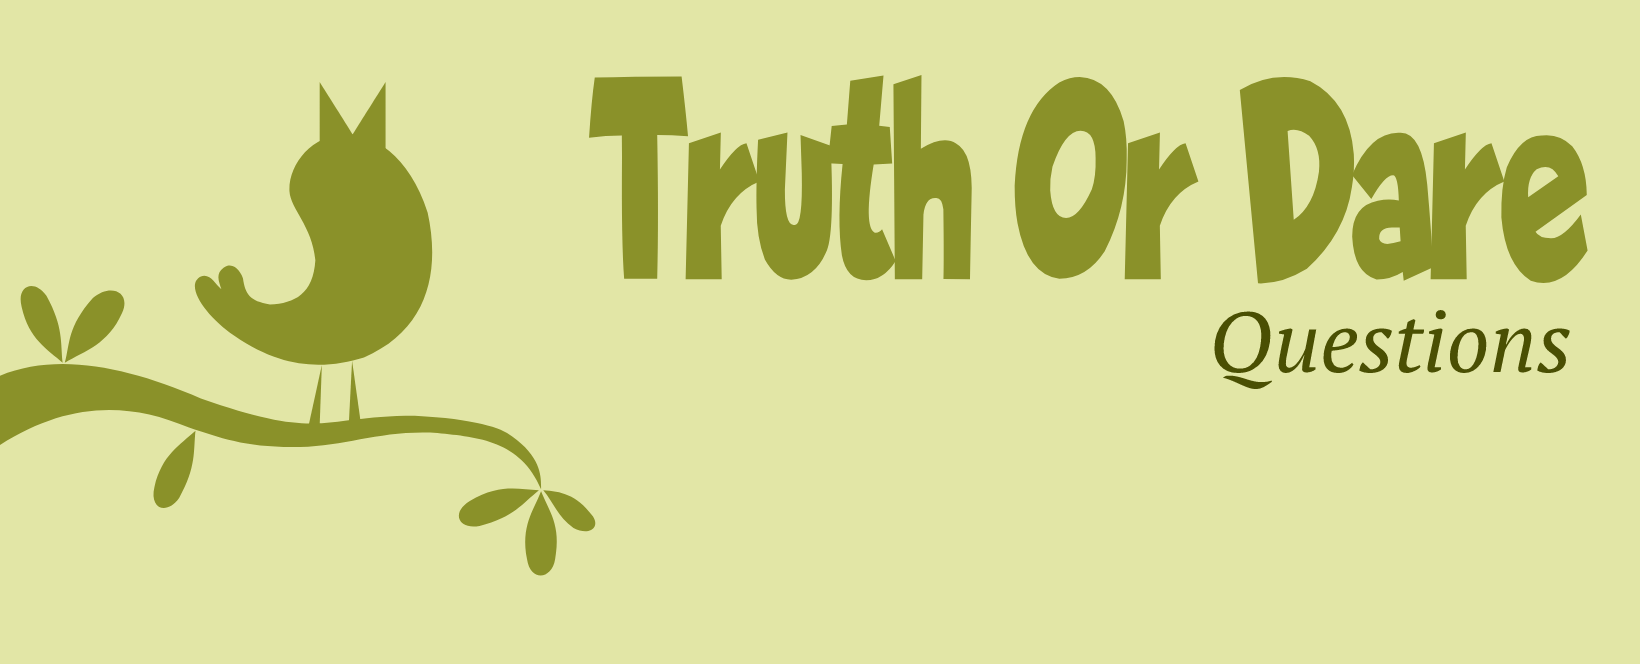 Truth or Dare Ideas: Fun Questions and Challenges for All Occasions